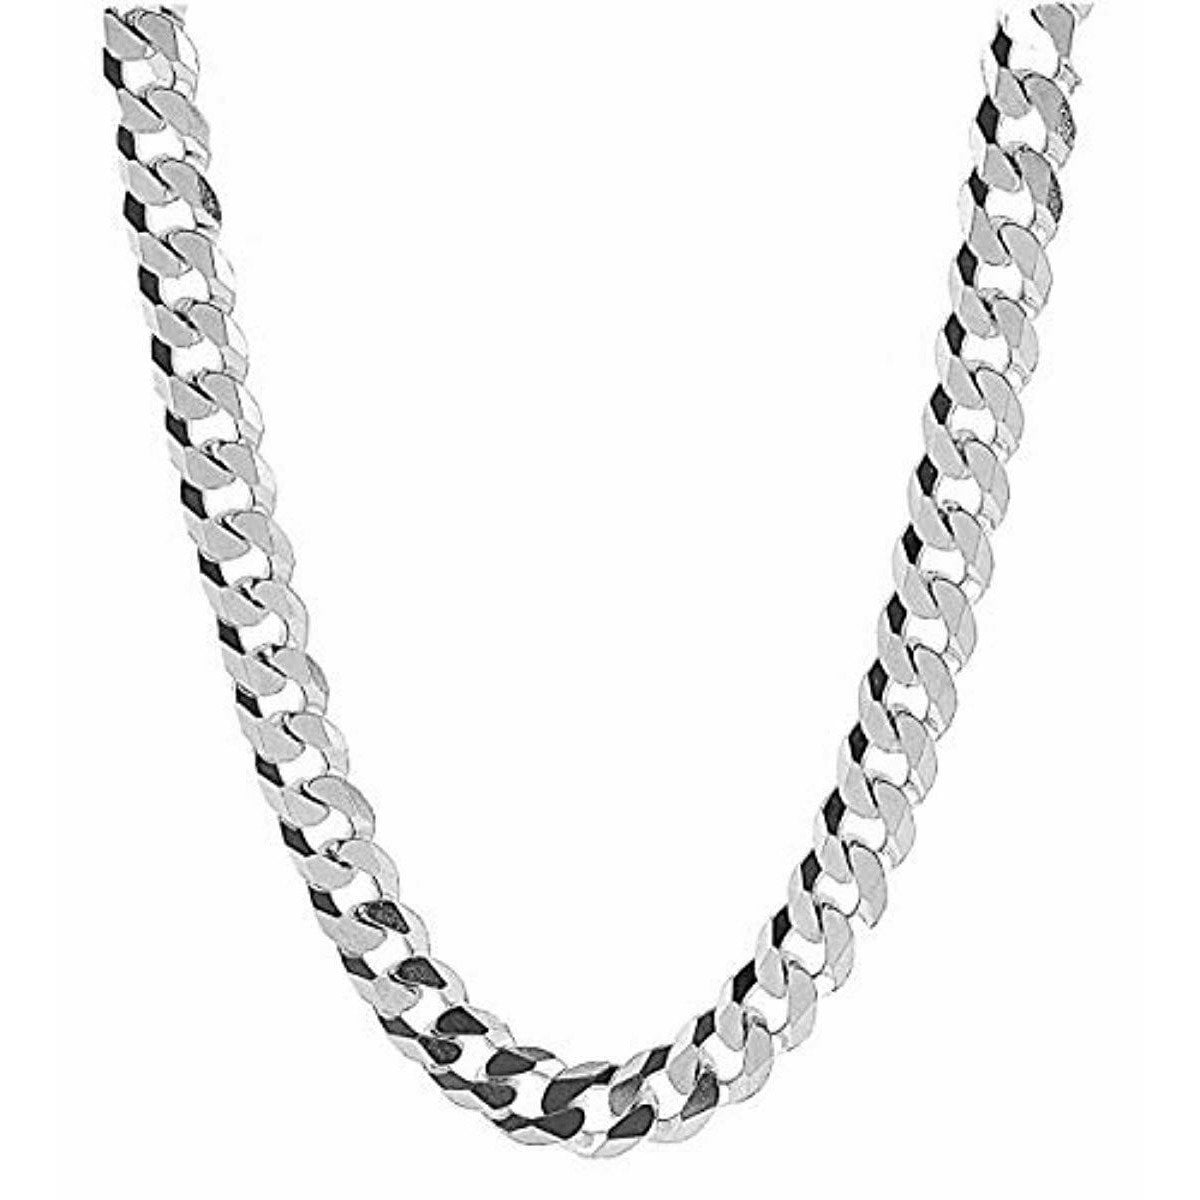 Aluminum Silver Chainmail Necklace Handmade Specialty Chain Necklace for Men or Women